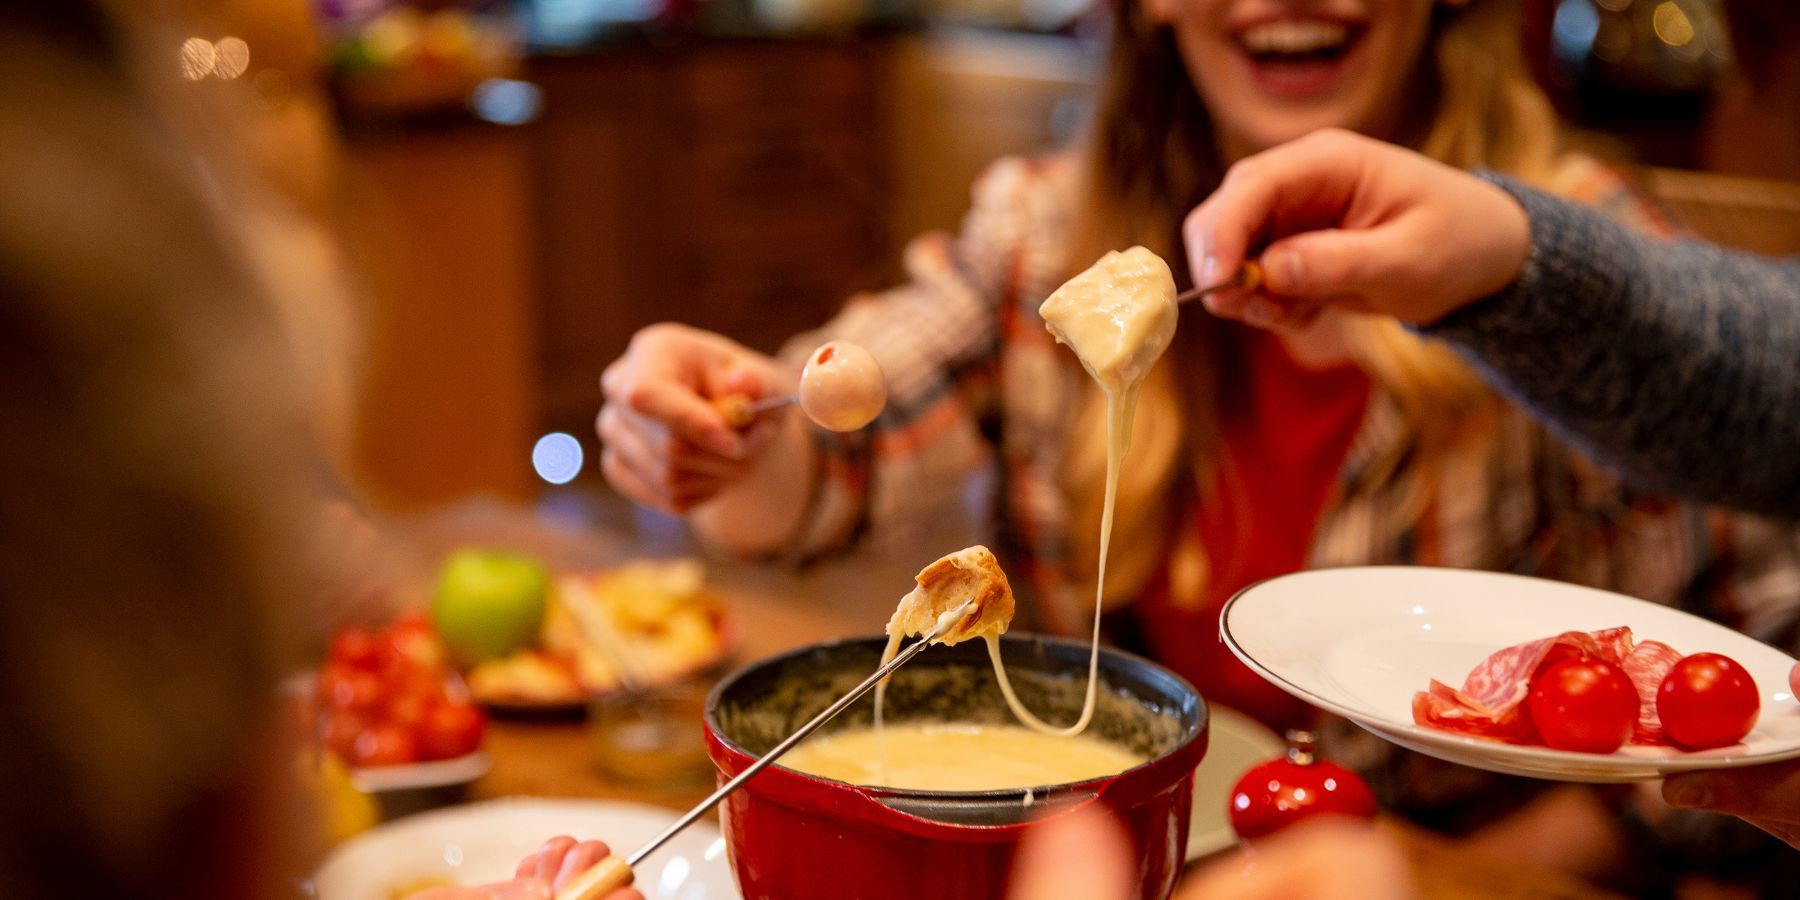 70s fondue party with everyone dipping into the cheese